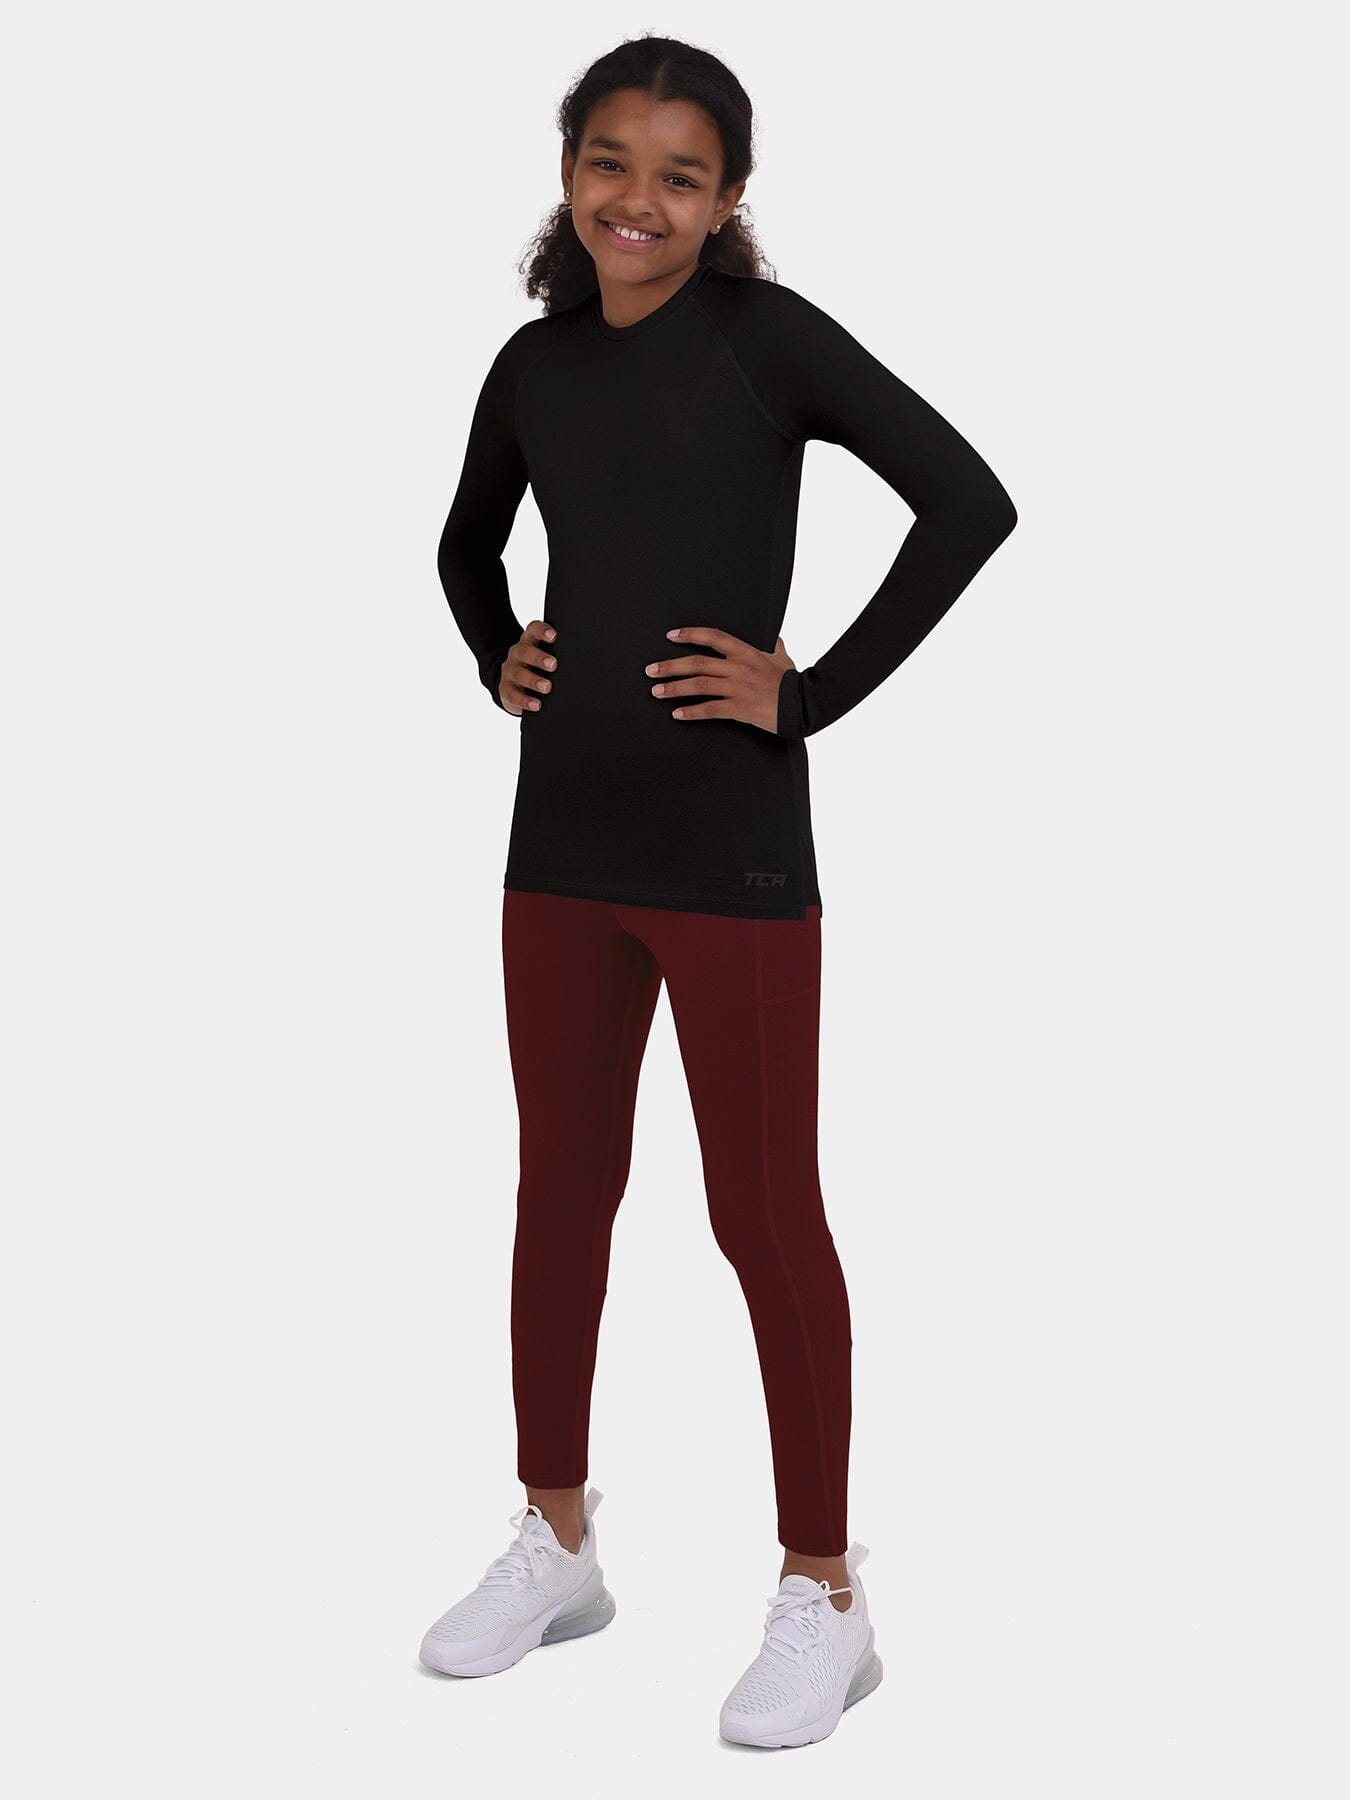 SuperThermal Compression Base Layer Top & Tights for Girls With Brushed Inner Fabric